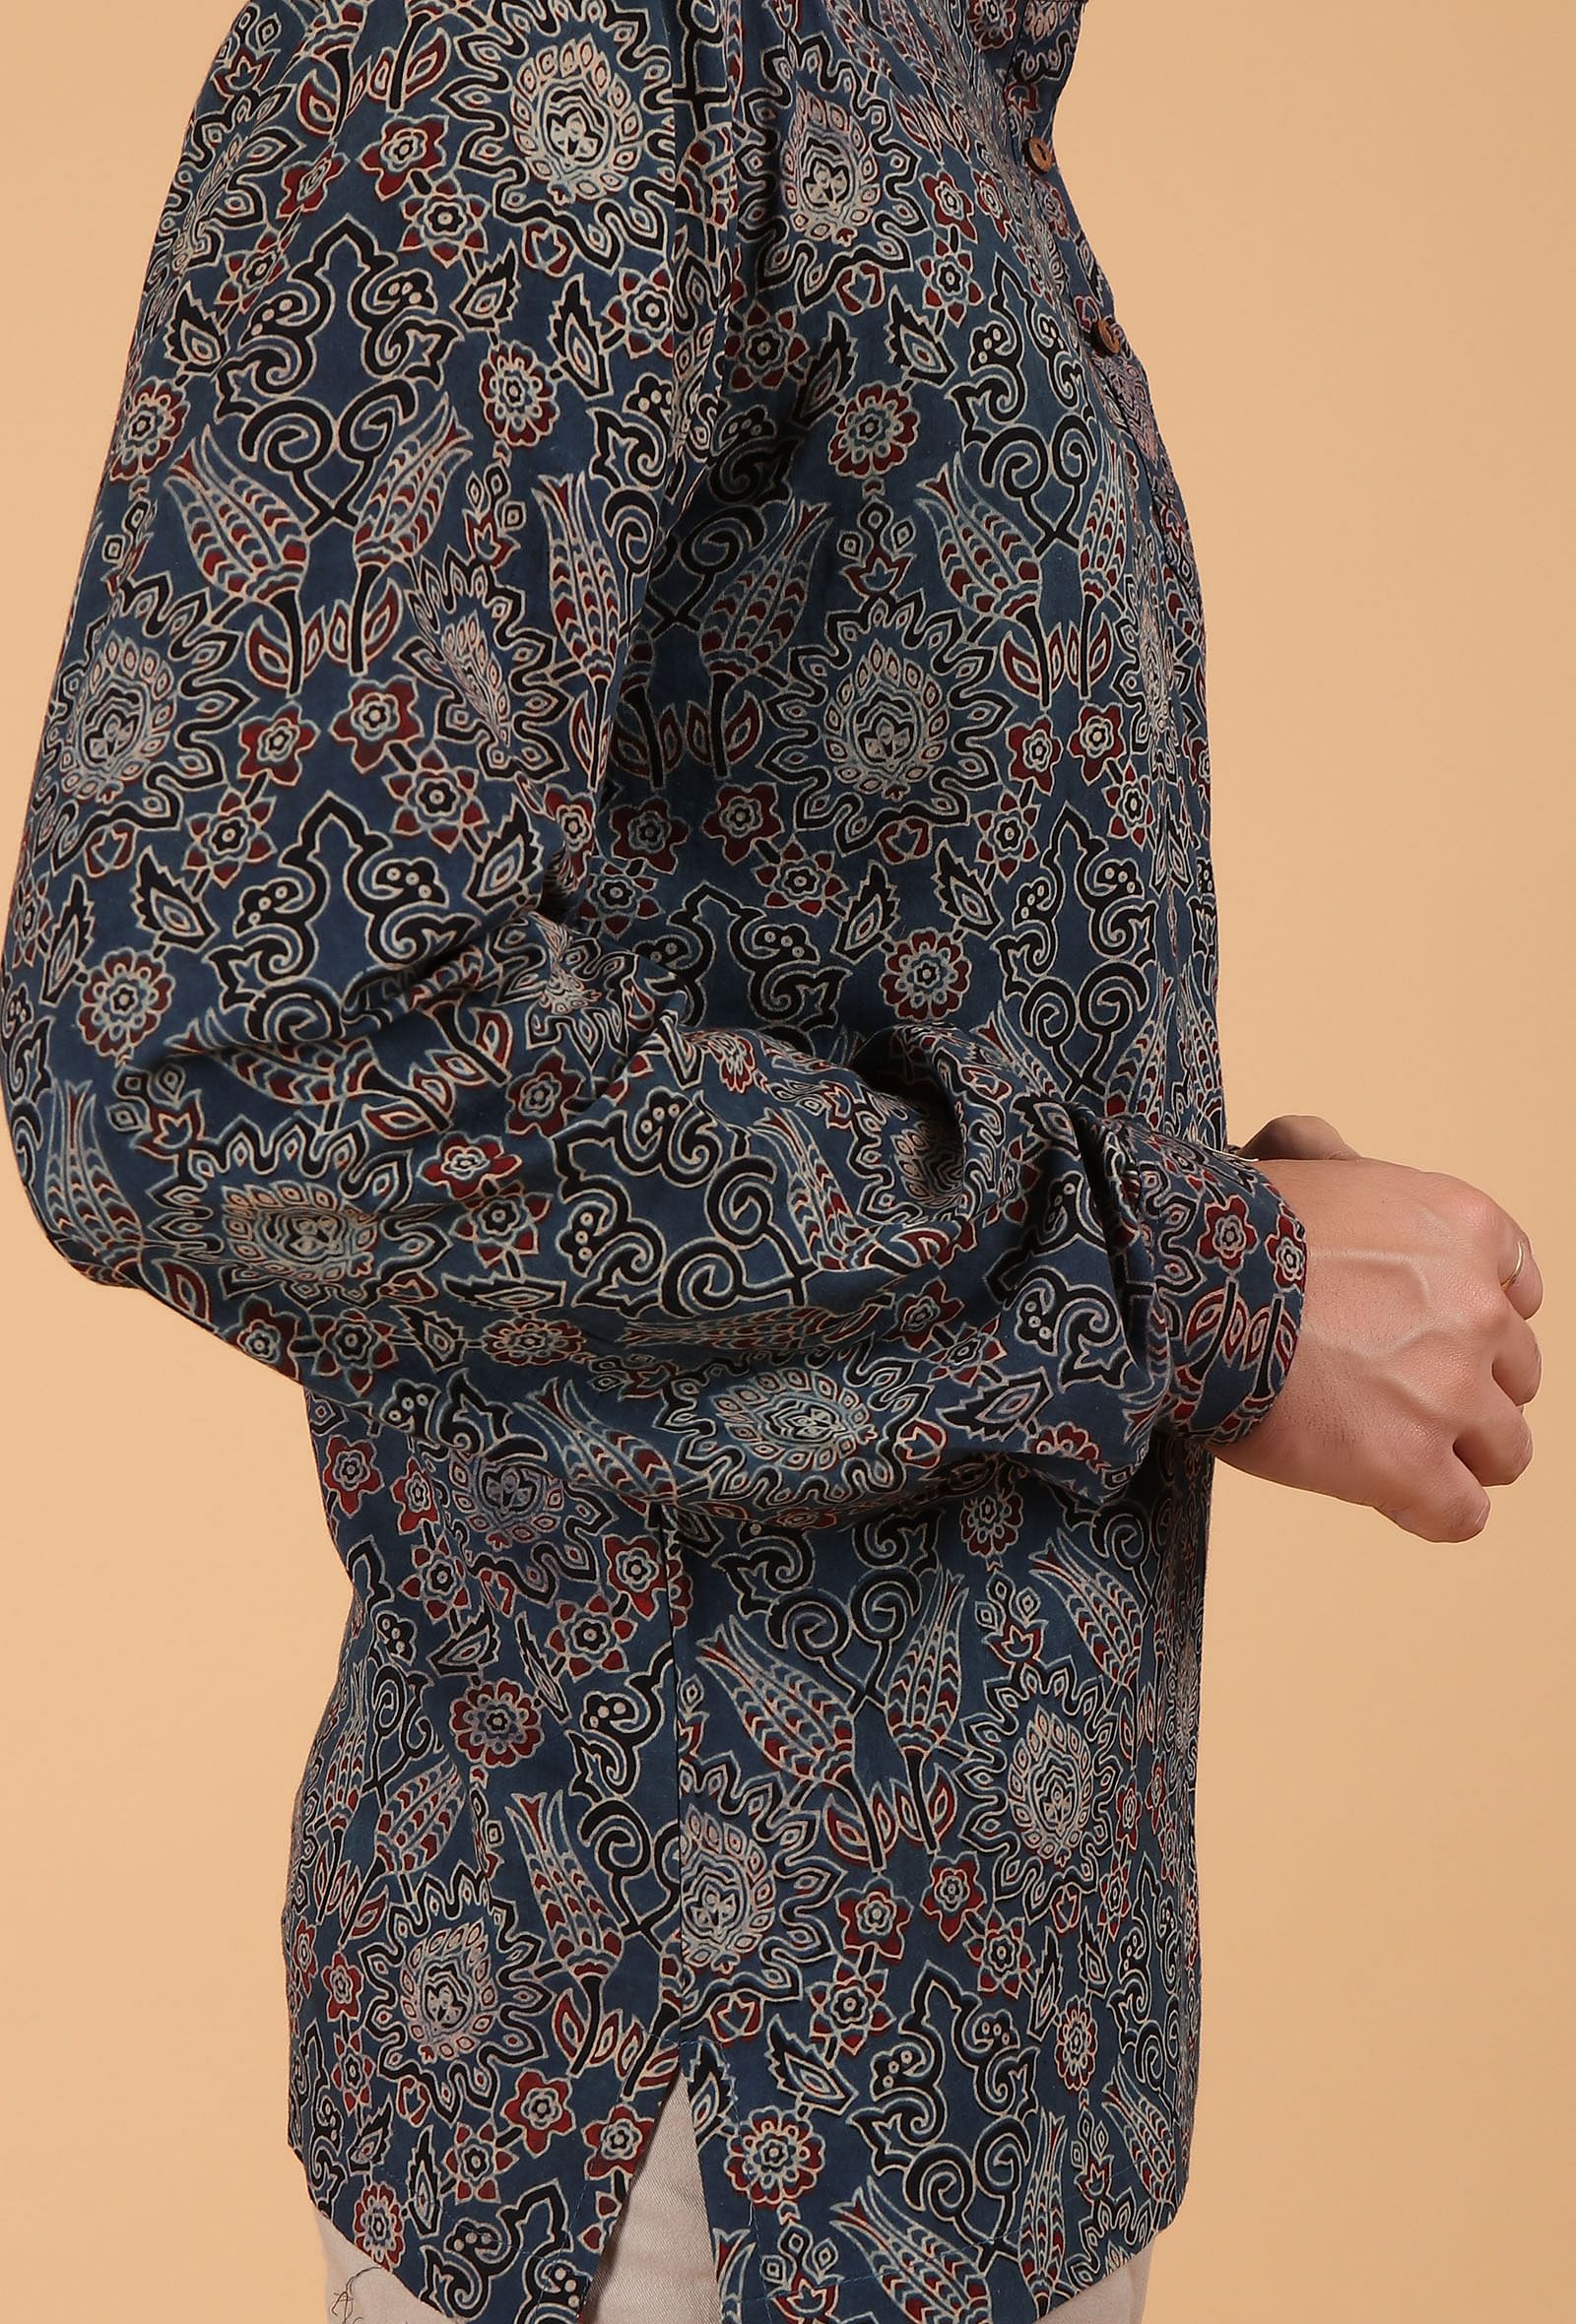 Blue Ajrakh Handcrafted Side Placket Full Sleeves Printed Cotton Shirt